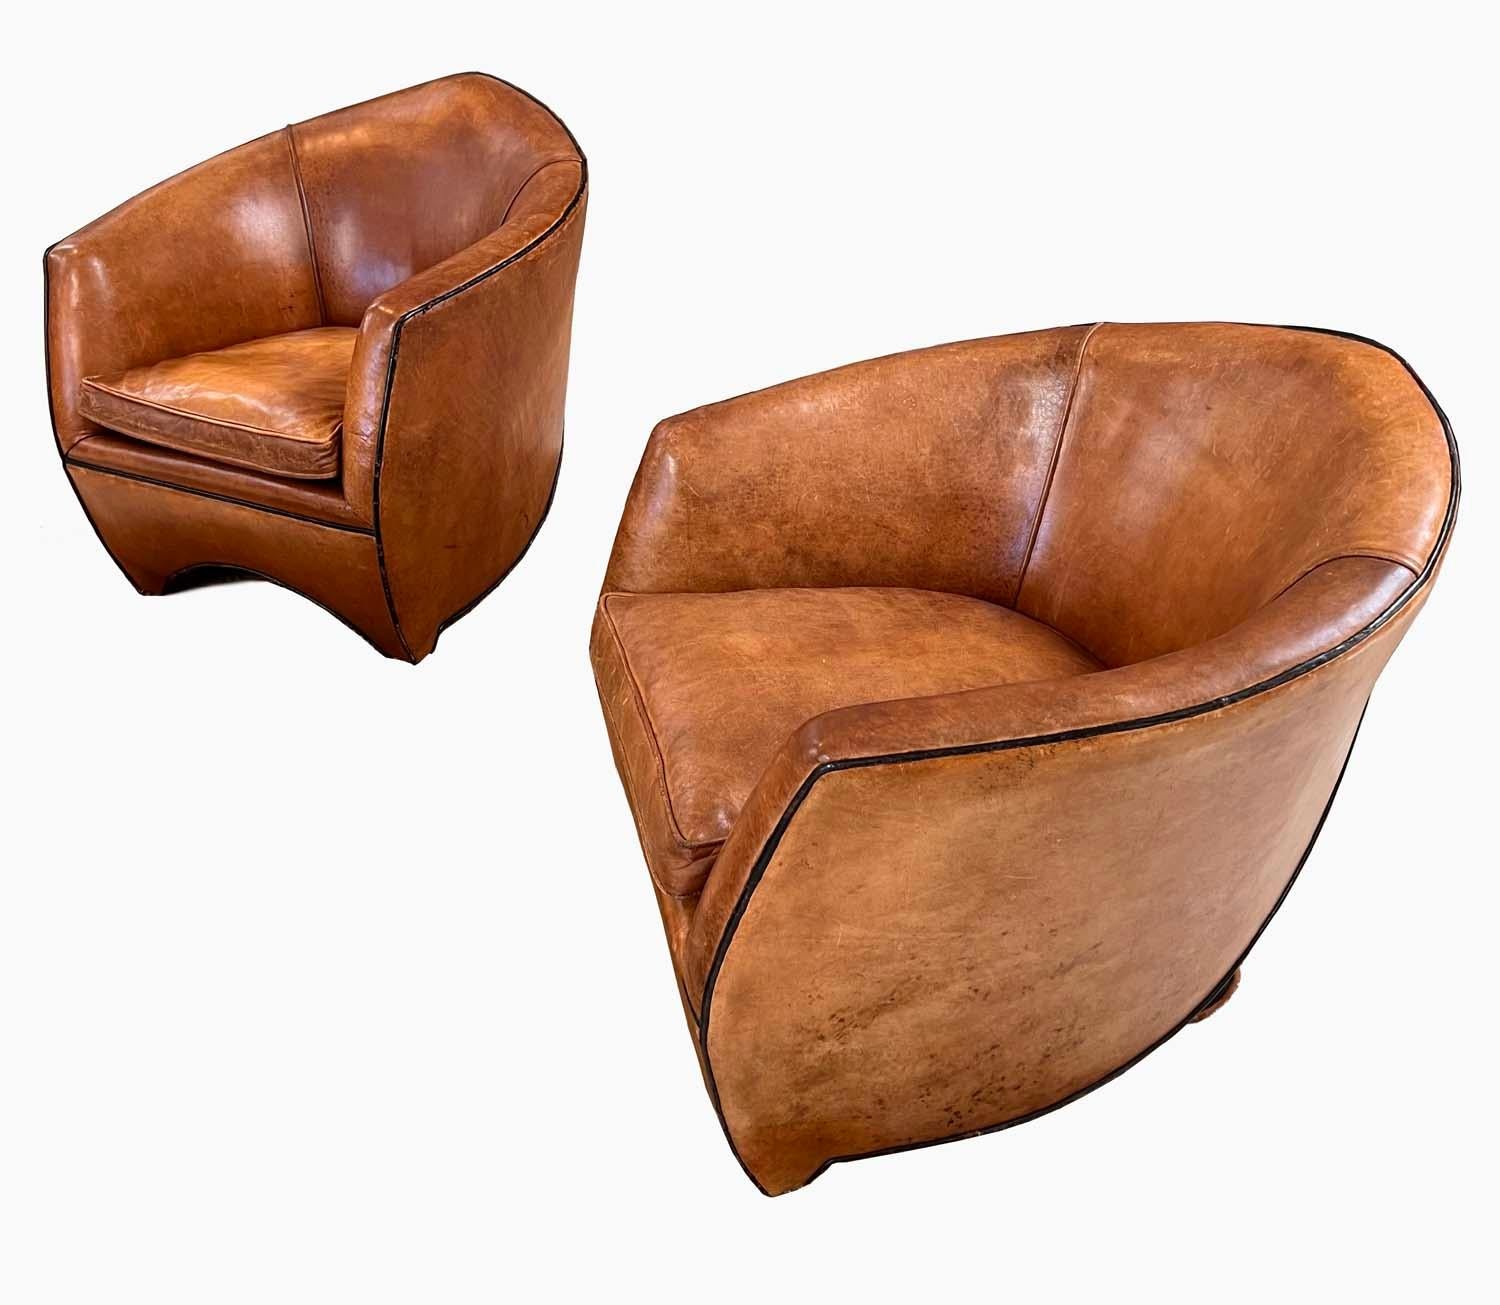 Pair of Bart Van Bekhoven, 'Cocoon' Lounge Chair, Leather, the Netherlands 2